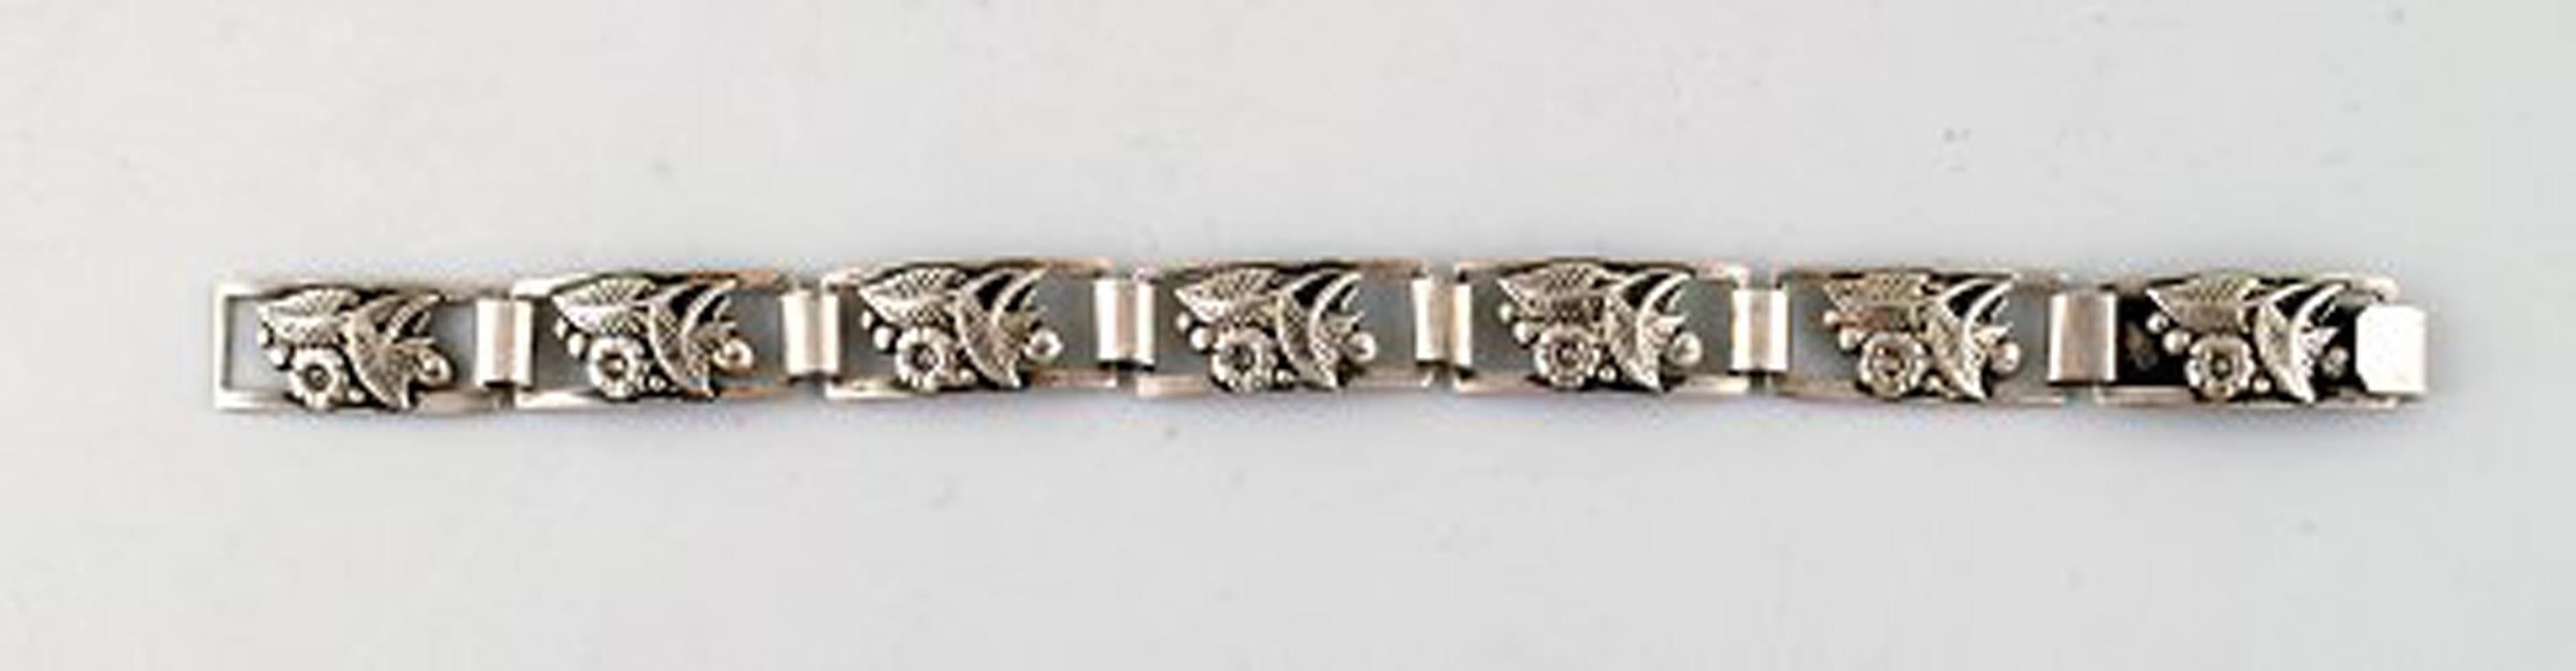 Modern Danish design, three bracelets in silver.
Stamped 830S.
In perfect condition.
Measures: 19.5 (longest)